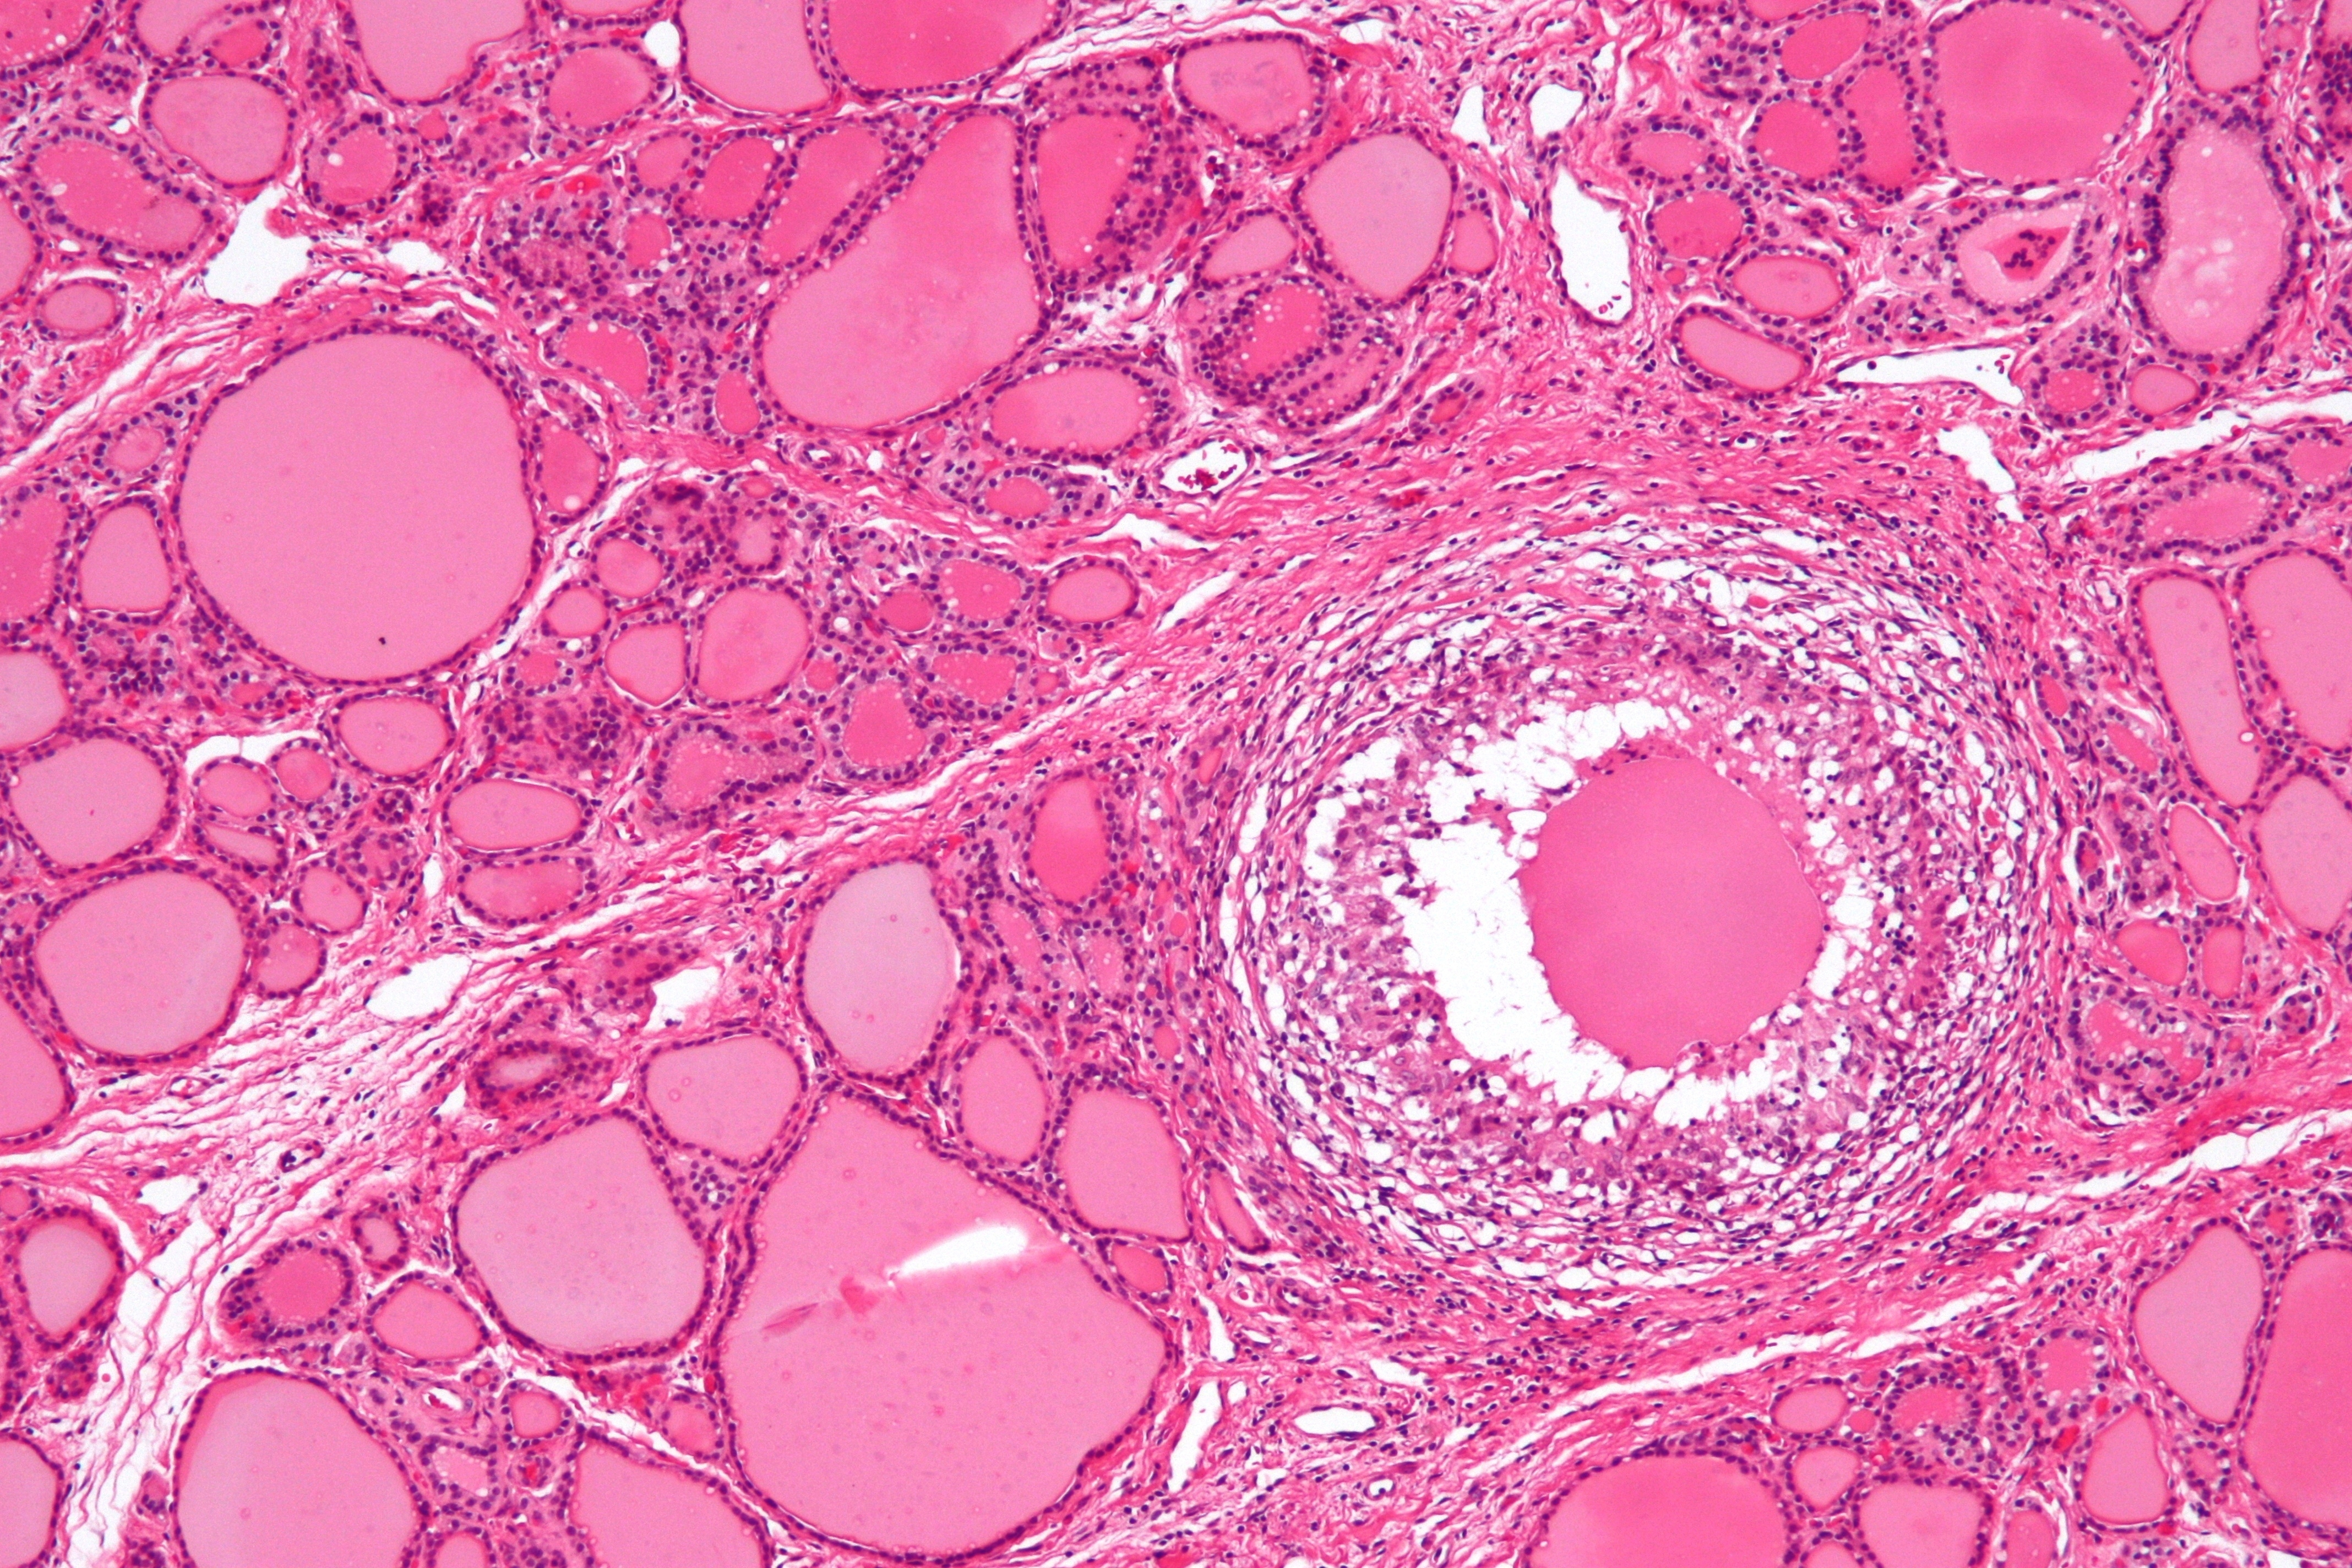 Histology of De Quervain's thyroiditis; Granuloma (By Nephron - Own work, CC BY-SA 3.0, https://commons.wikimedia.org/w/index.php?curid=18491382)